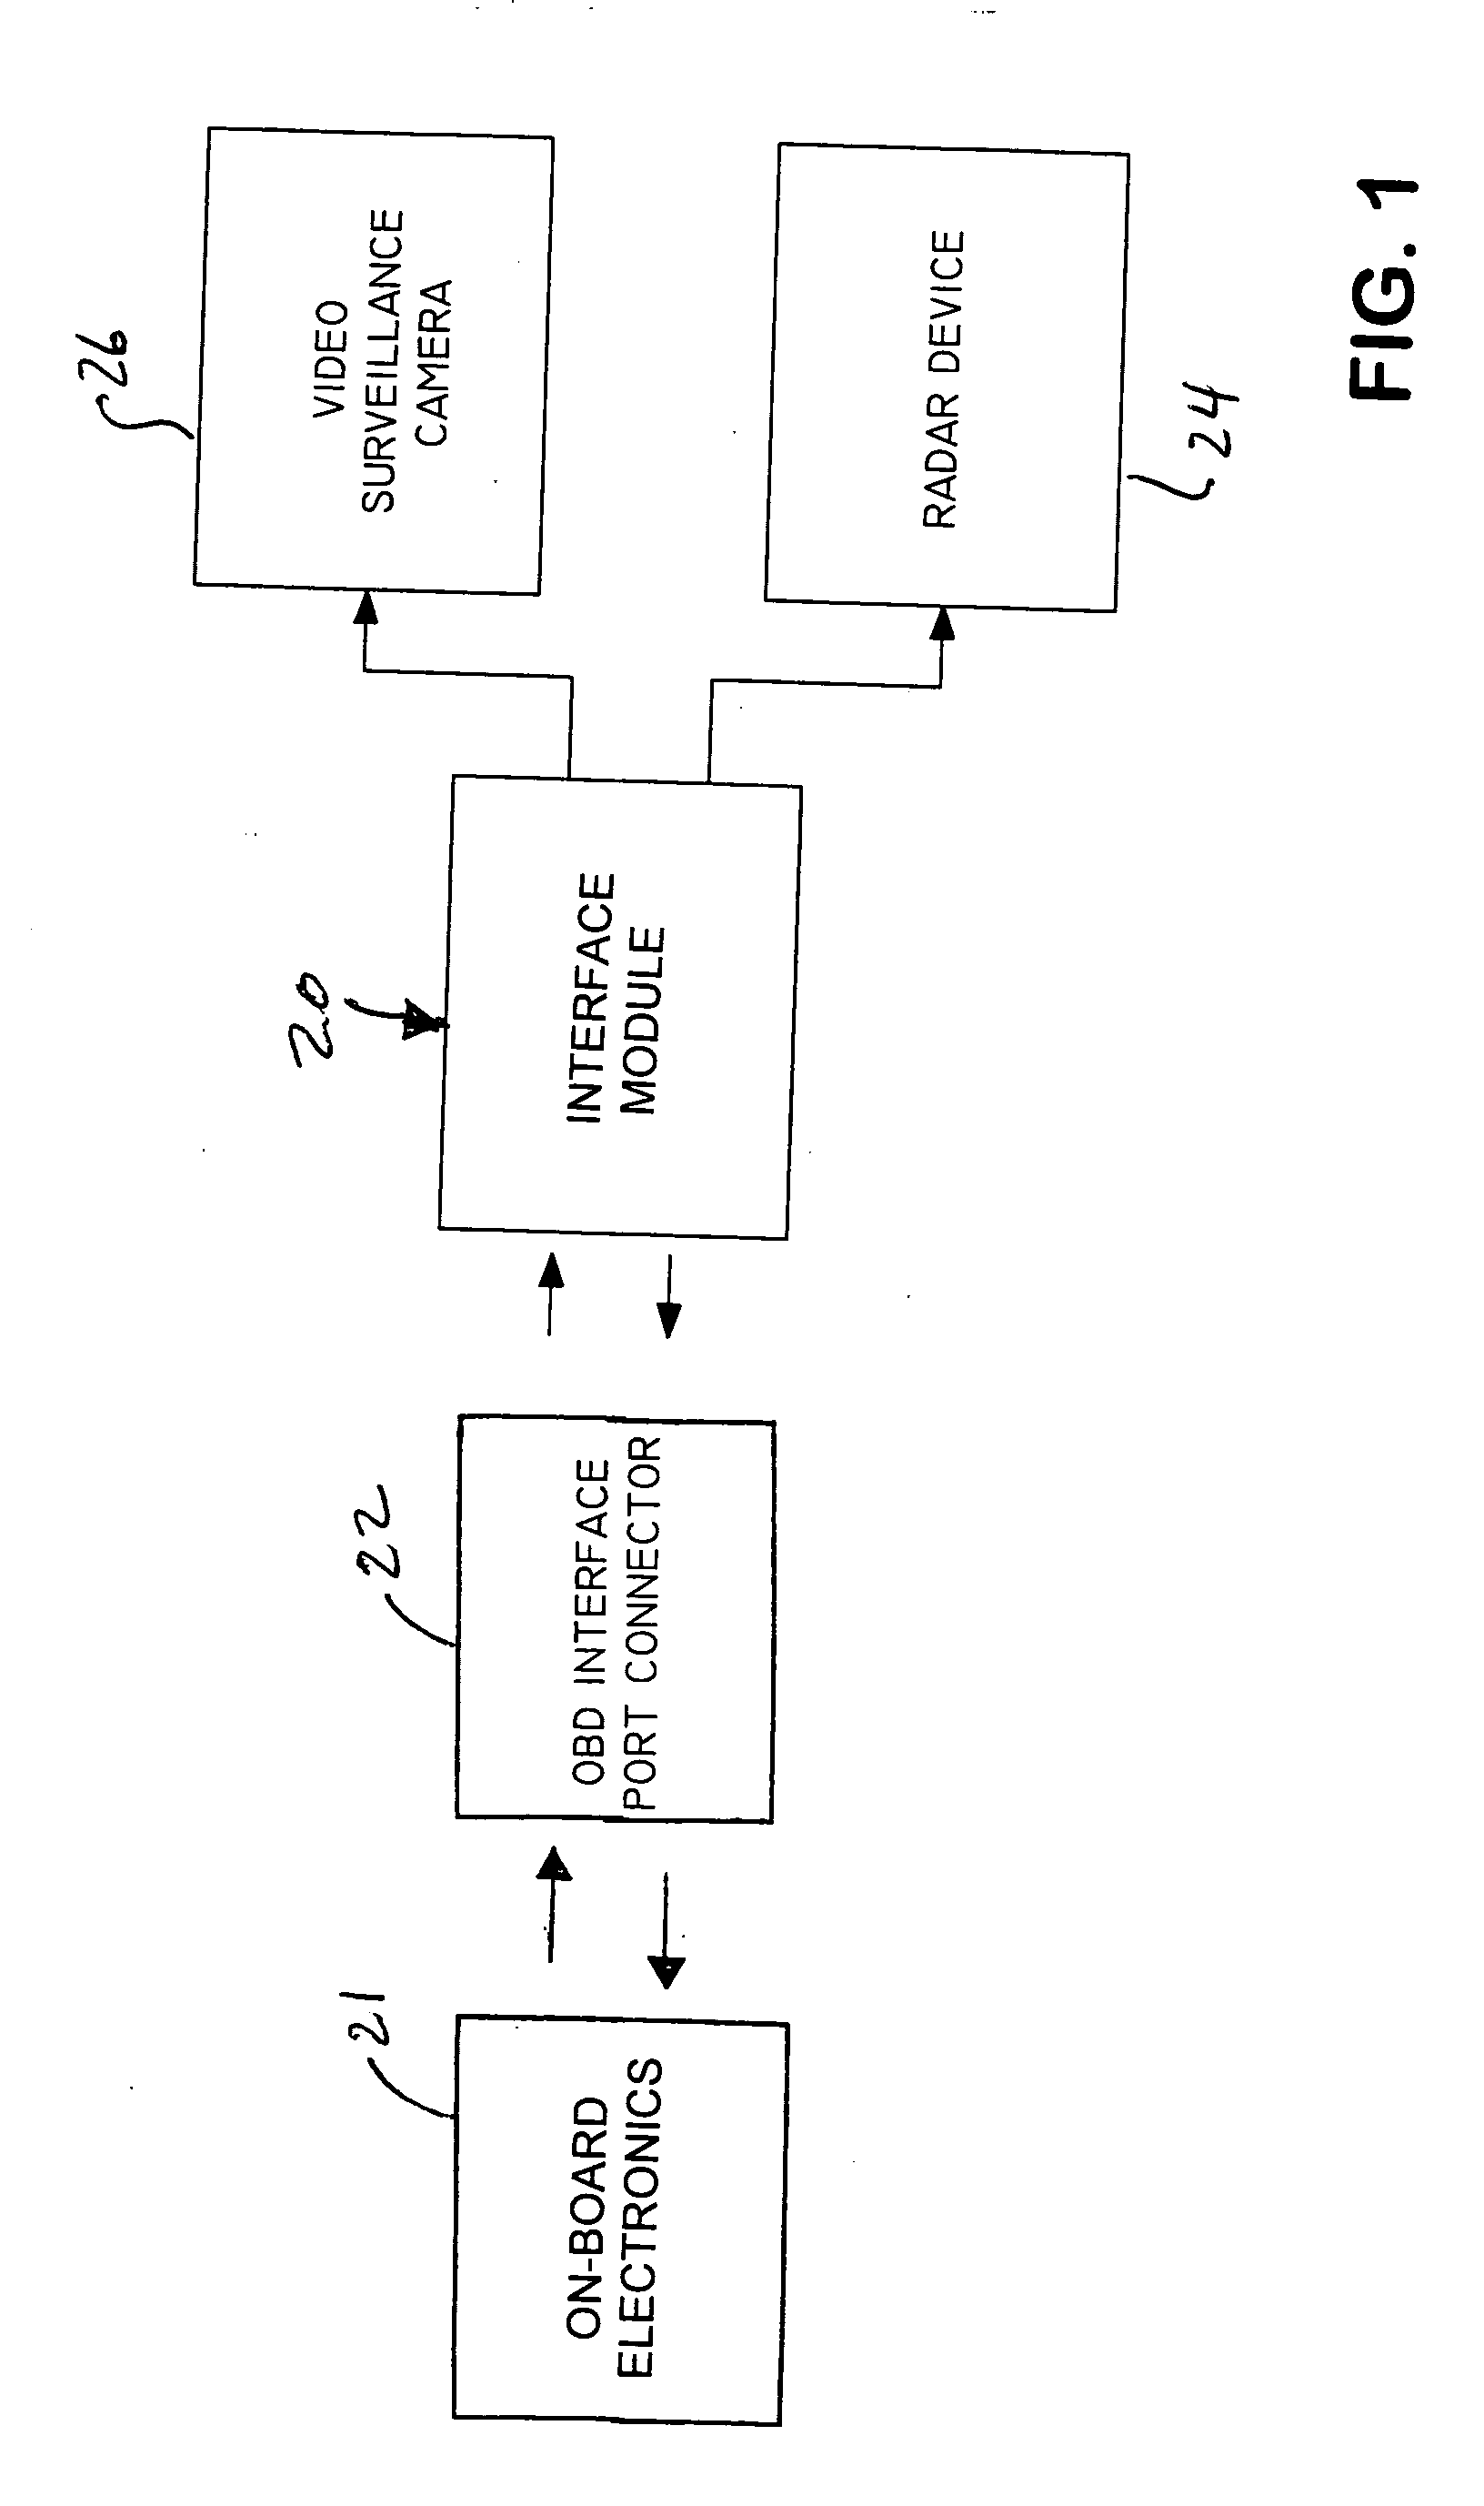 Vehicular electronics interface module and related methods